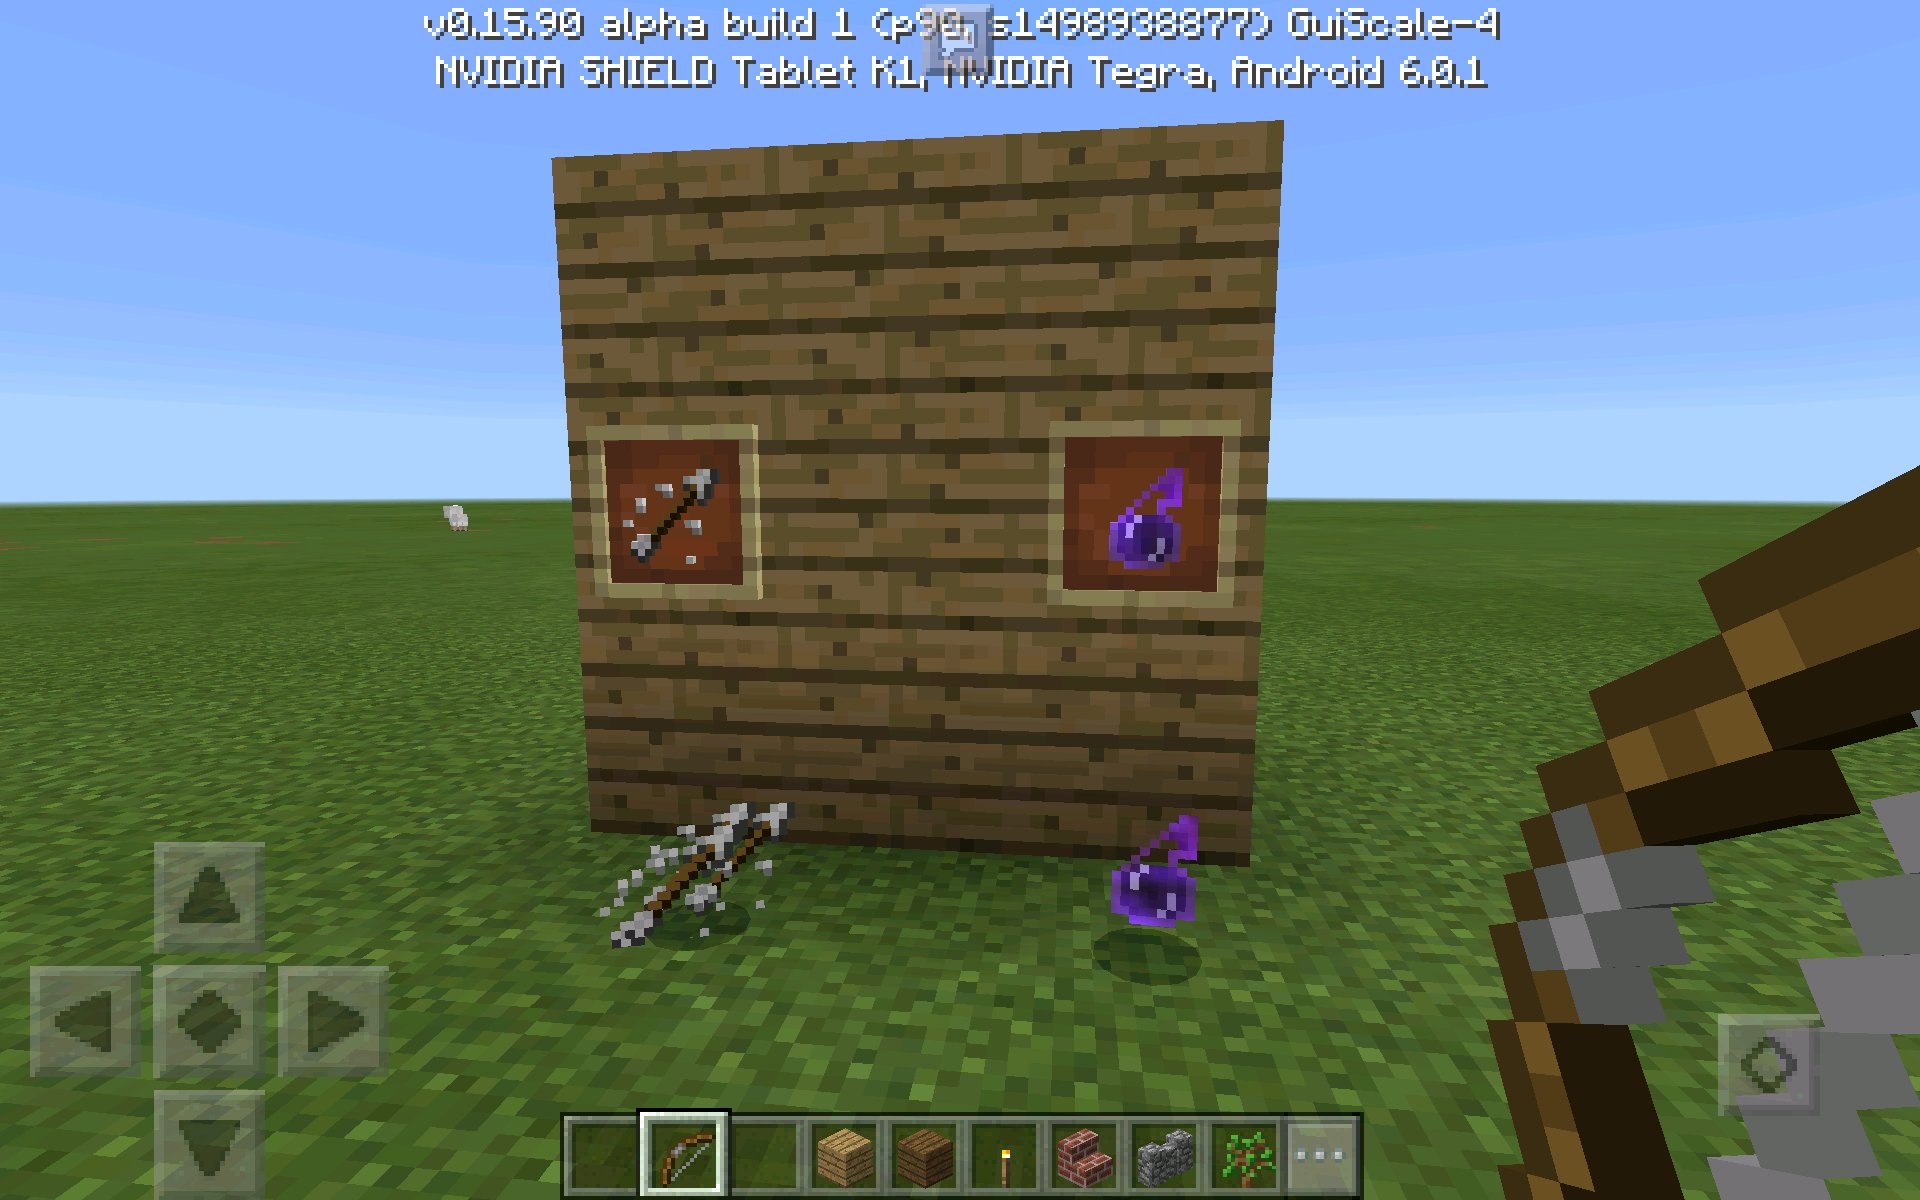 MCPE BETA 1.3 on Twitter: "Wither Tipped Arrows and the 